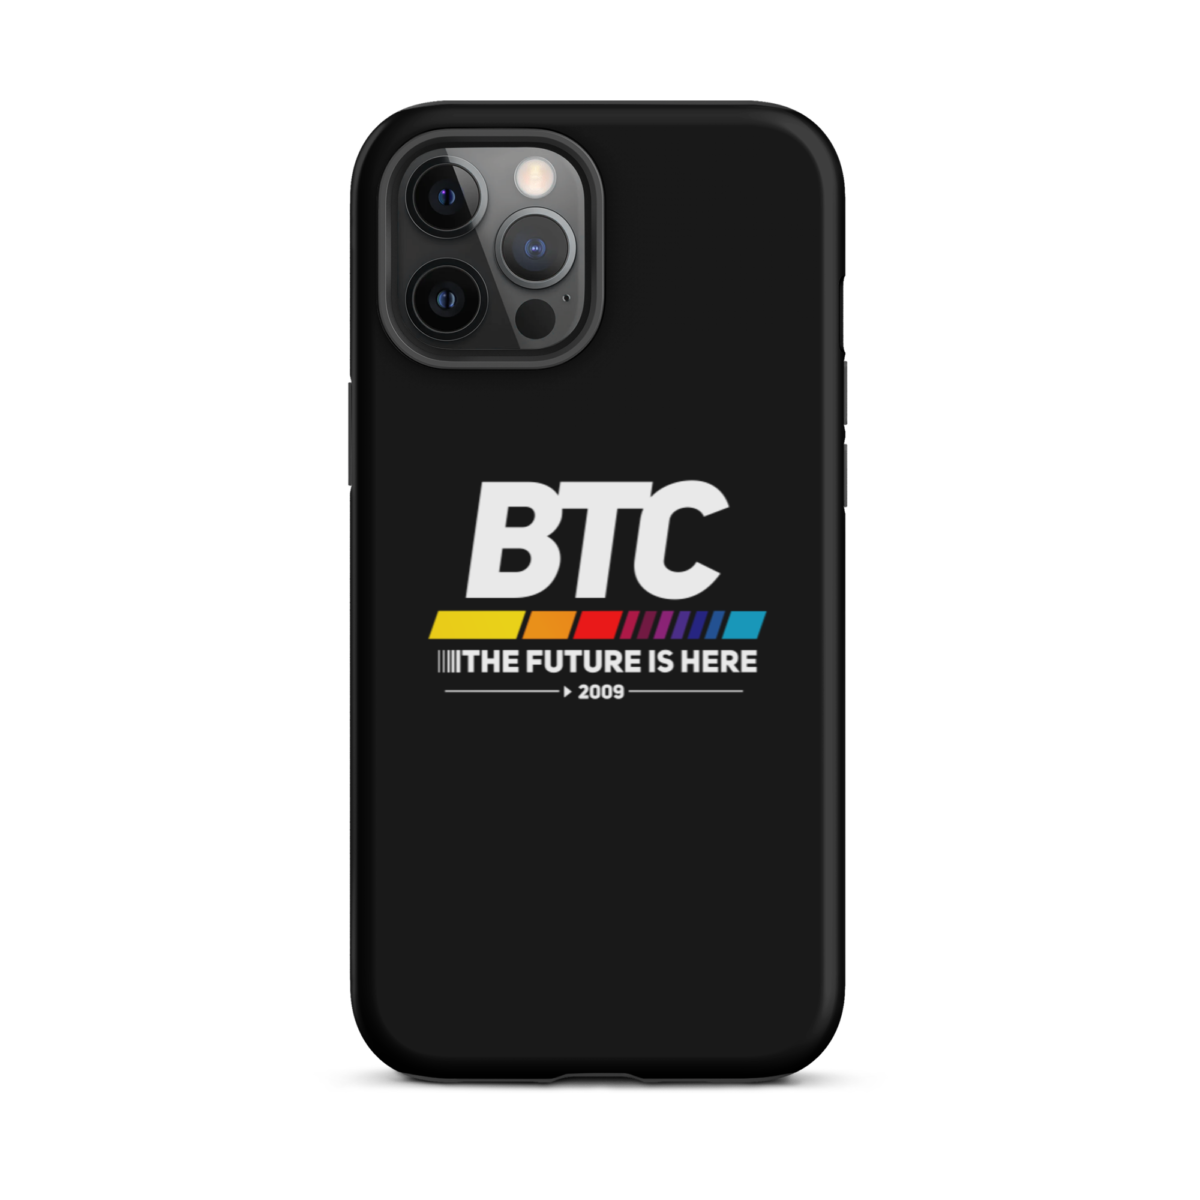 tough iphone case glossy iphone 12 pro max front 6345d56a311ed - BTC: The Future Is Here Tough iPhone Case